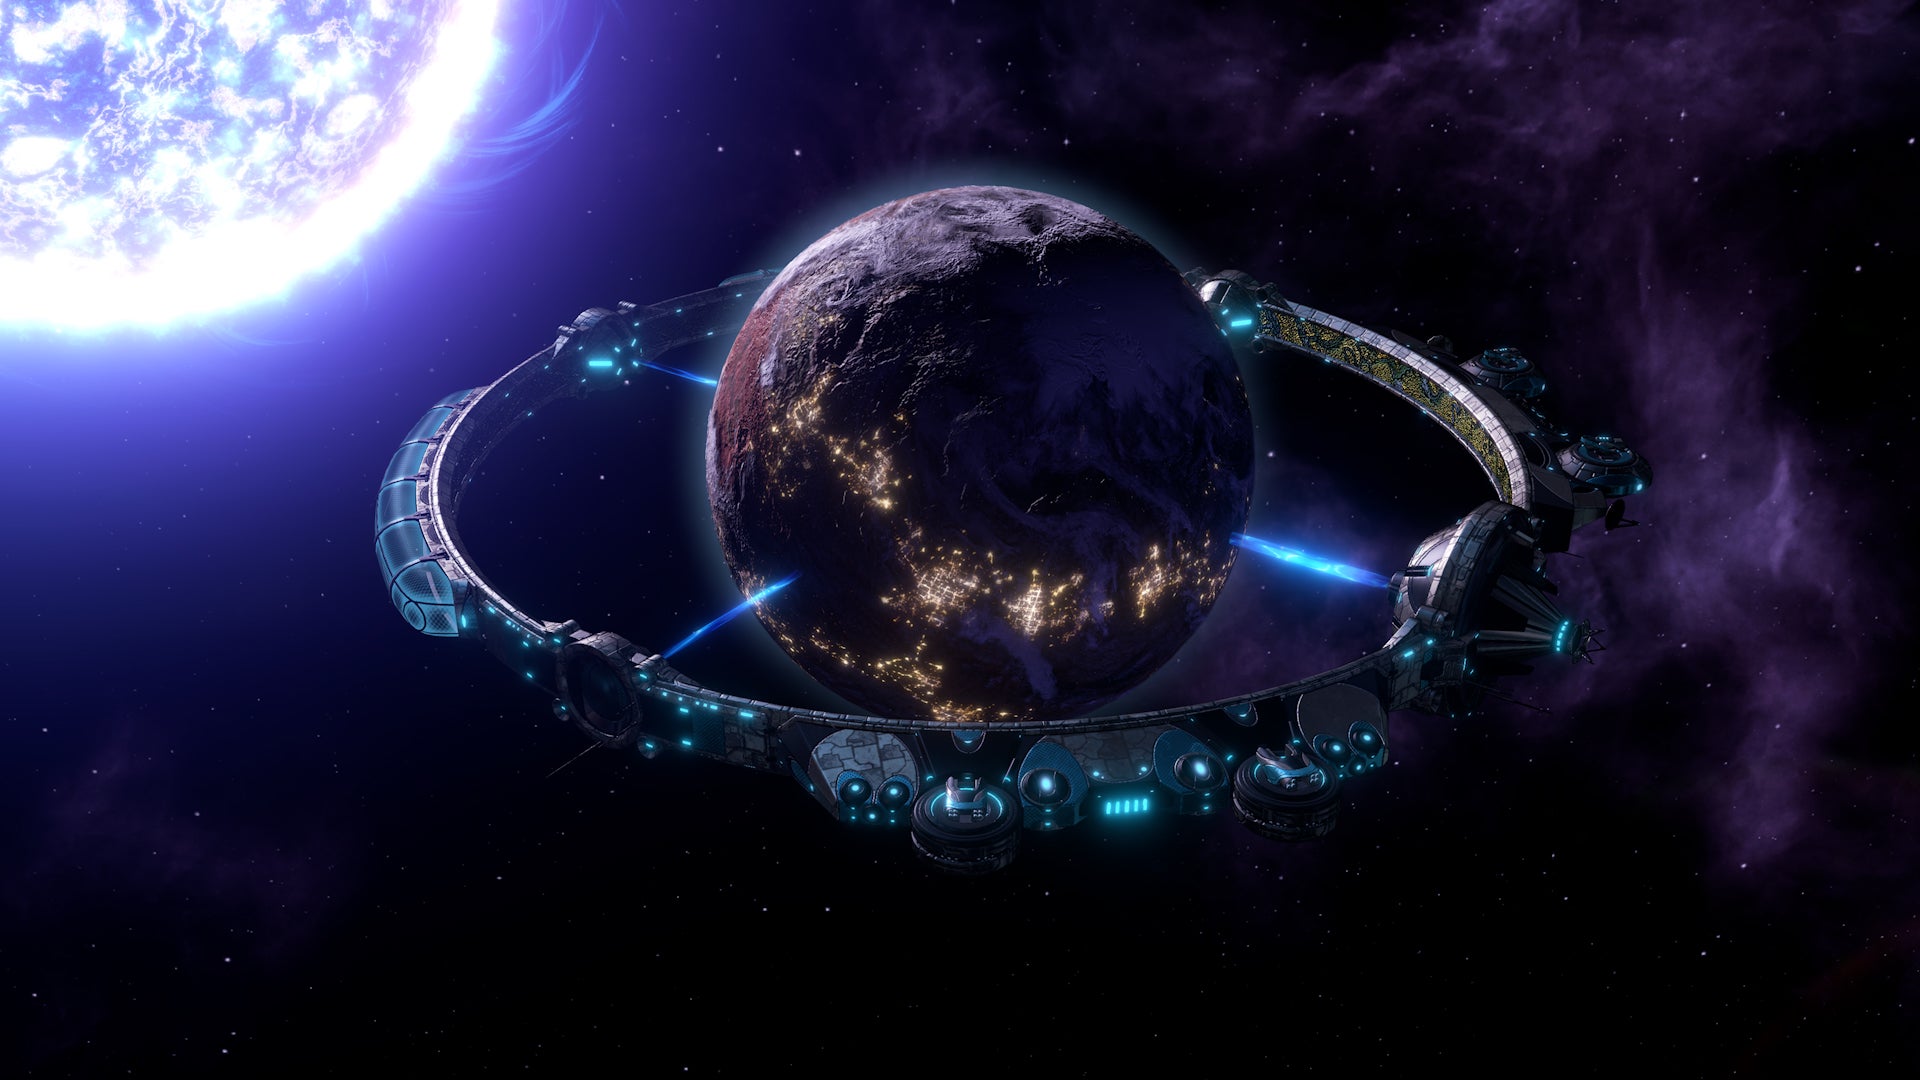 A screenshot of Stellaris's Overlord expansion showing a planet with an artificial ring around it.